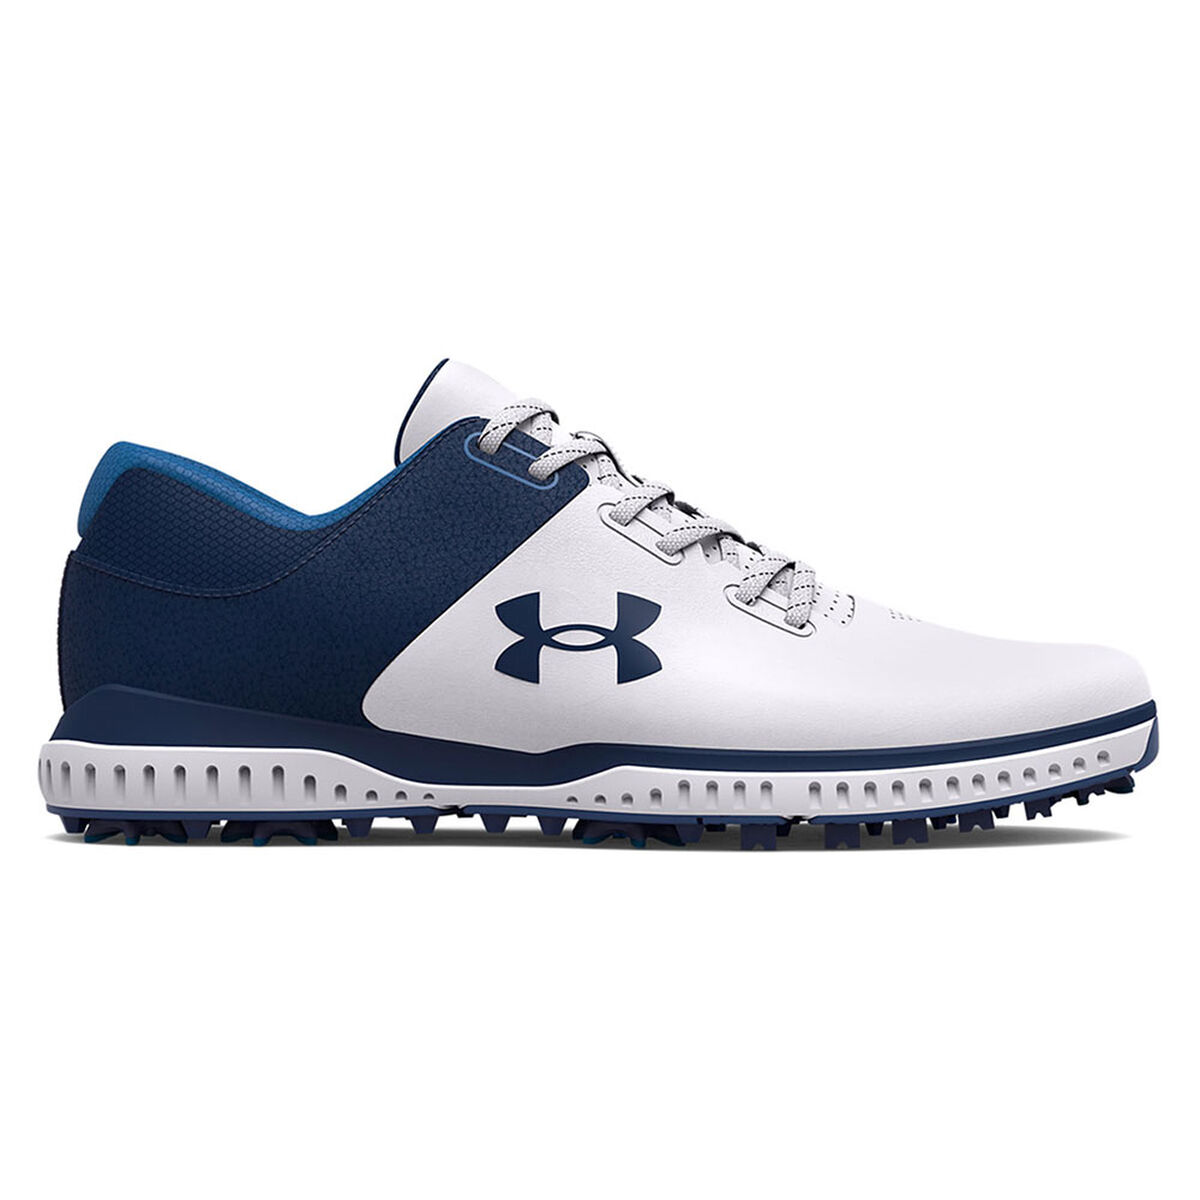 Under Armour Men’s Medal RST Waterproof Spiked Golf Shoes, Mens, White/academy/academy, 9 | American Golf